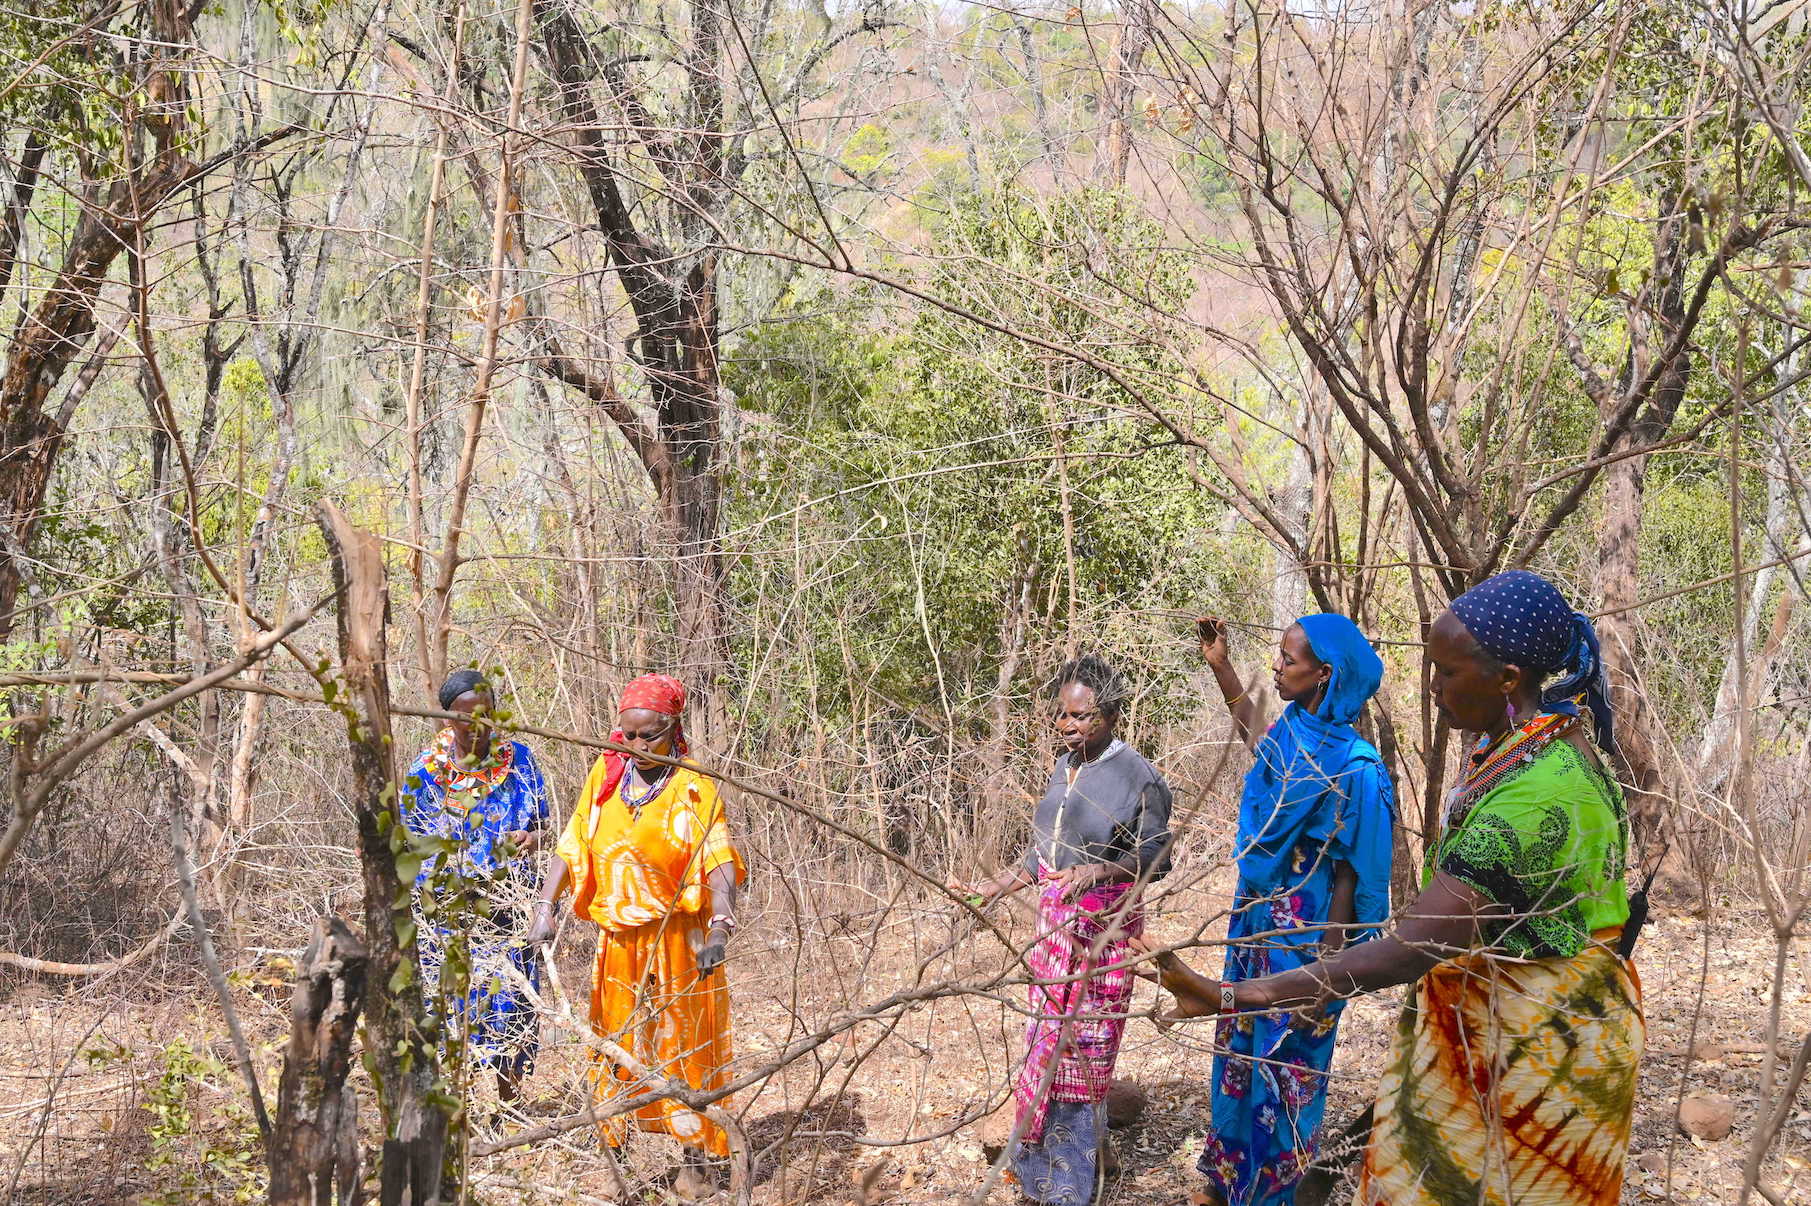 Women groups have taken it upon themselves to watch over the forest and prevent further deforestation and damage to the fragile ecosystem.